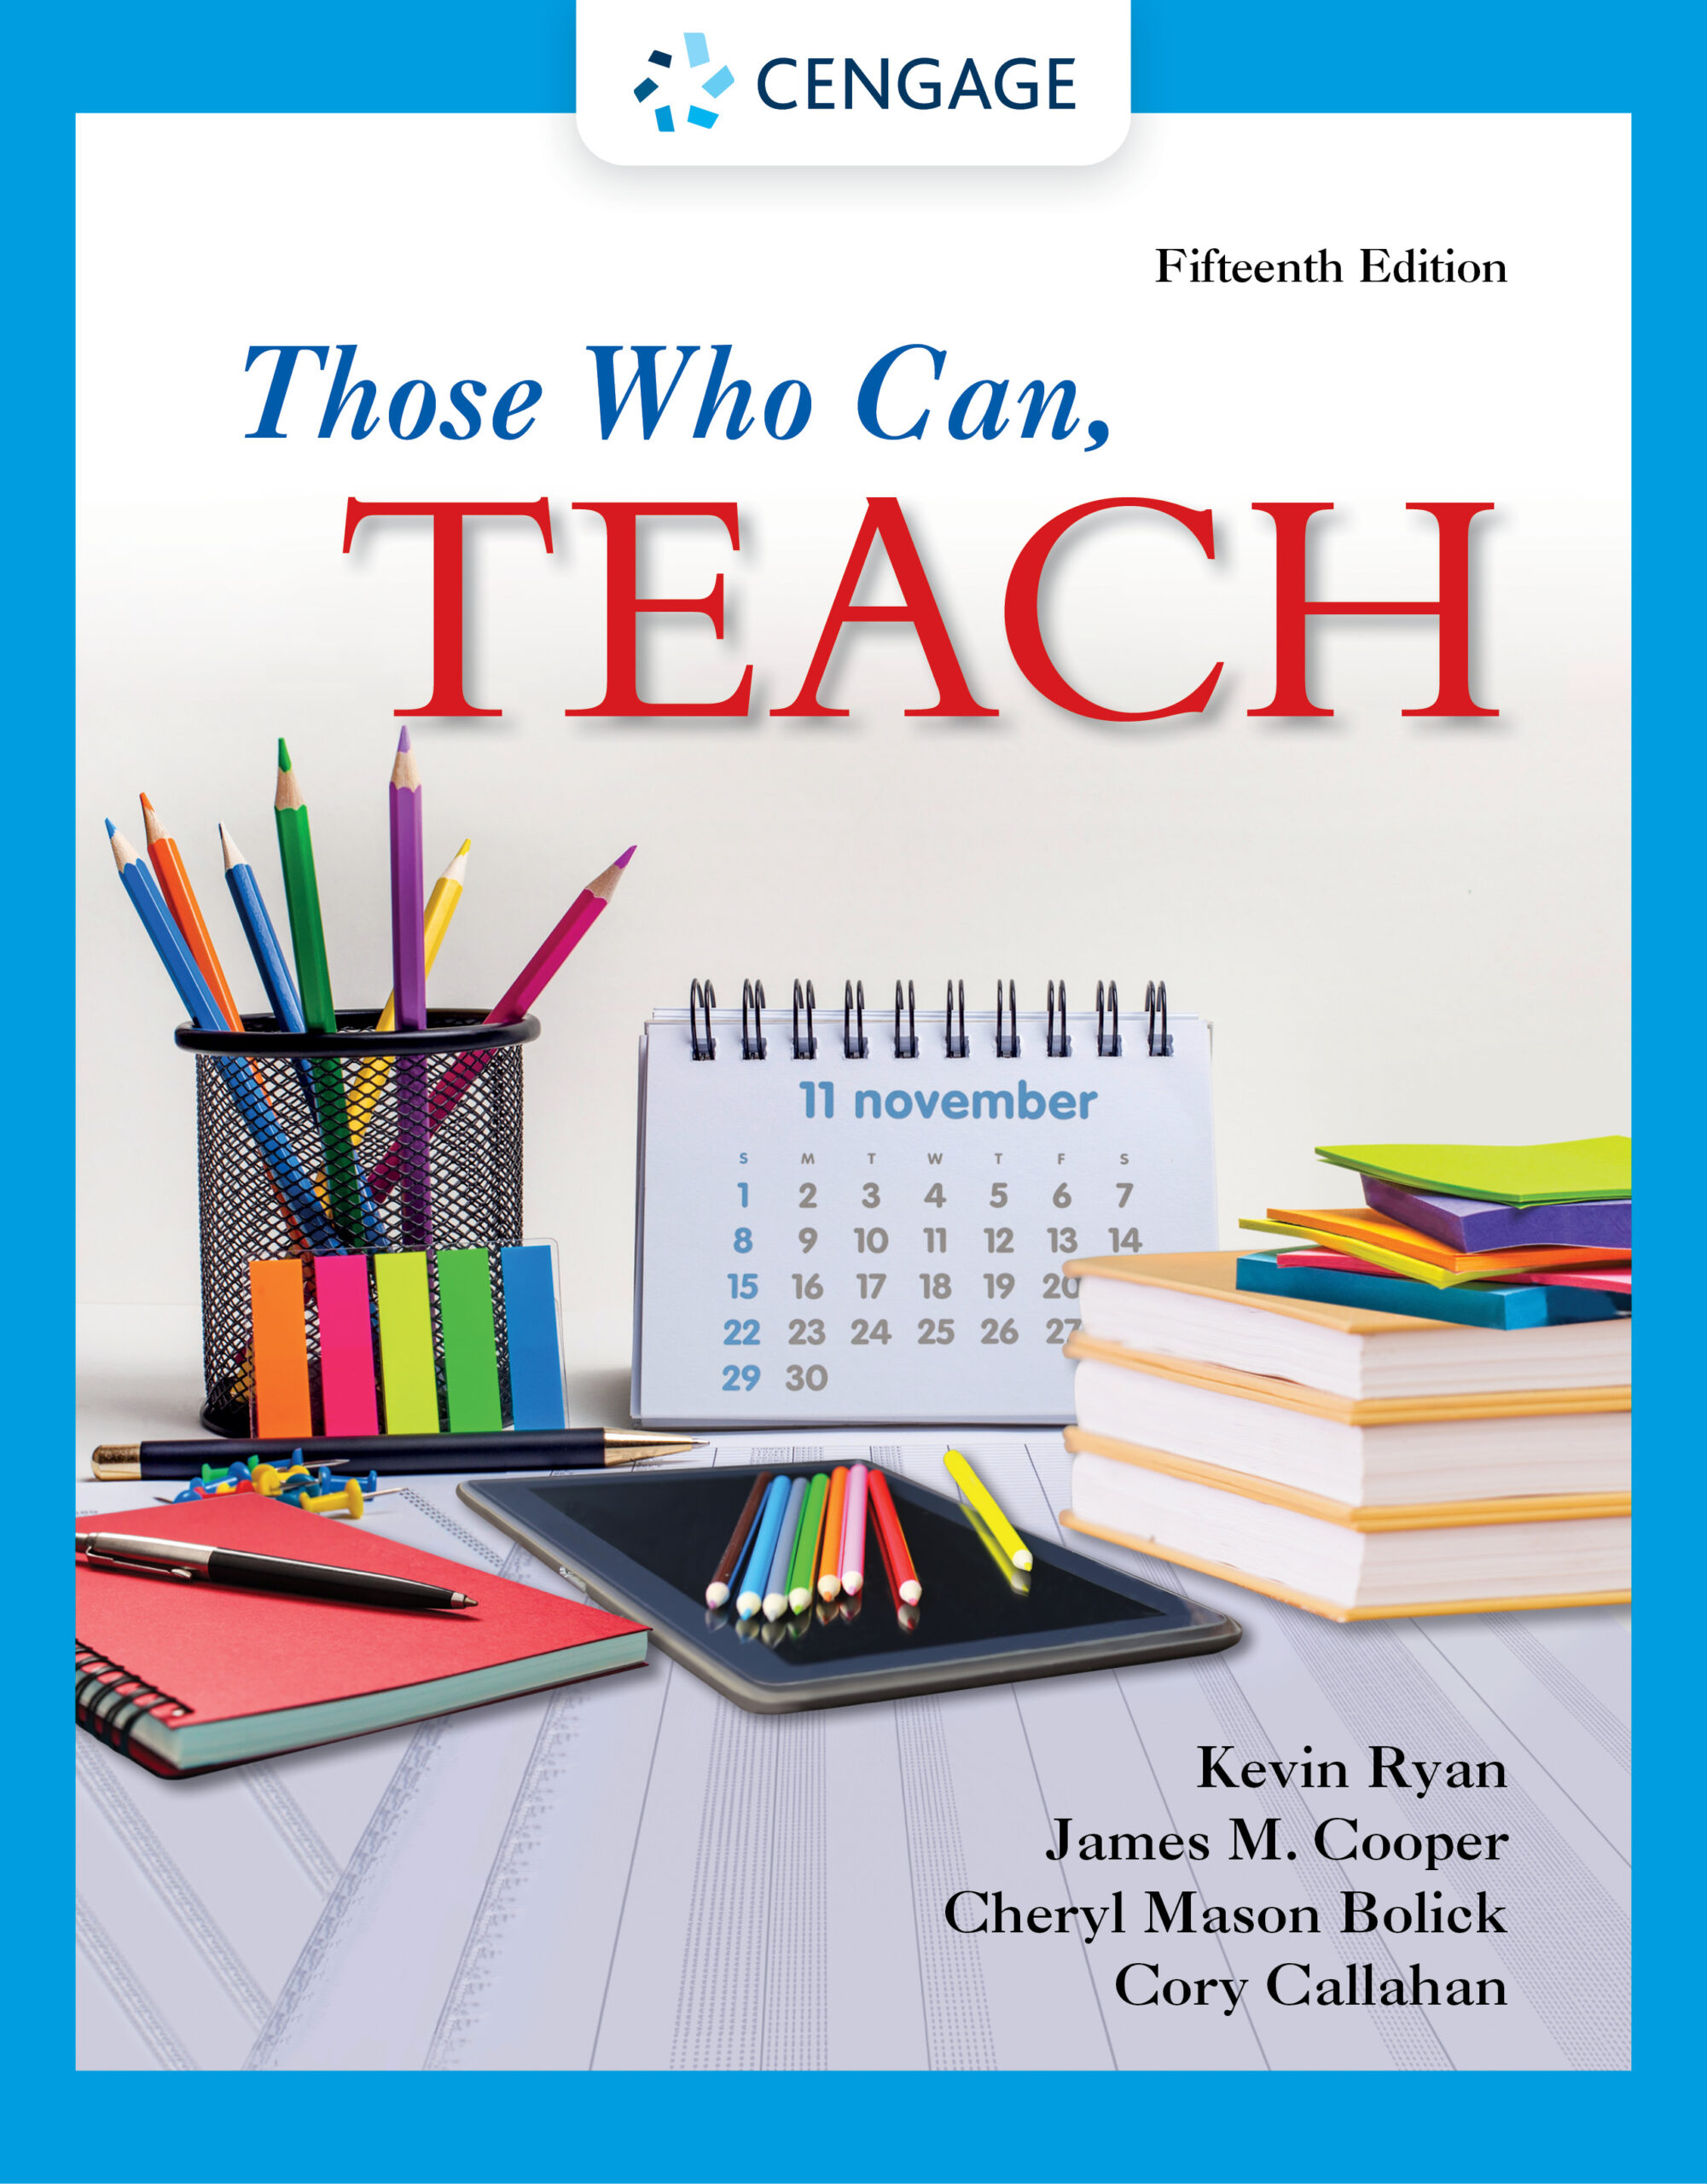 Those Who Can, Teach book cover